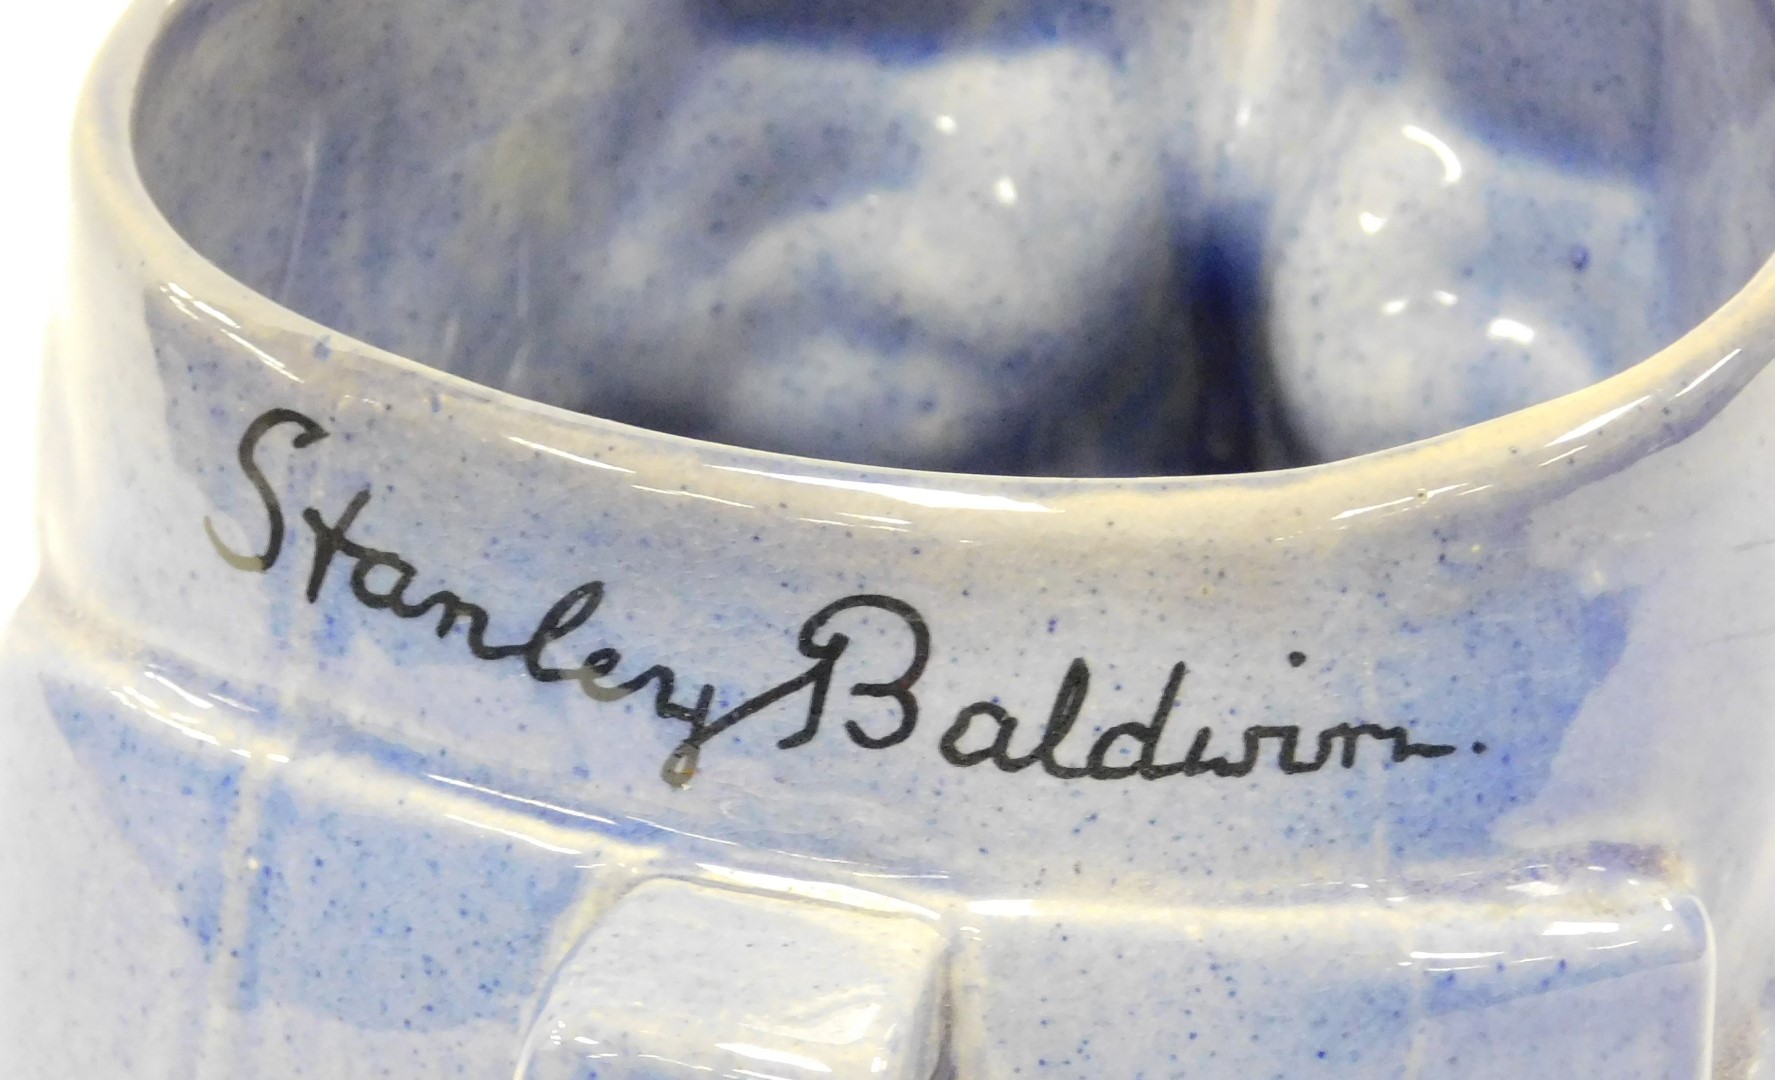 An early 20thC Ashstead pottery character jug of Stanley Baldwin, Prime Minister, limited edition 97 - Image 4 of 5